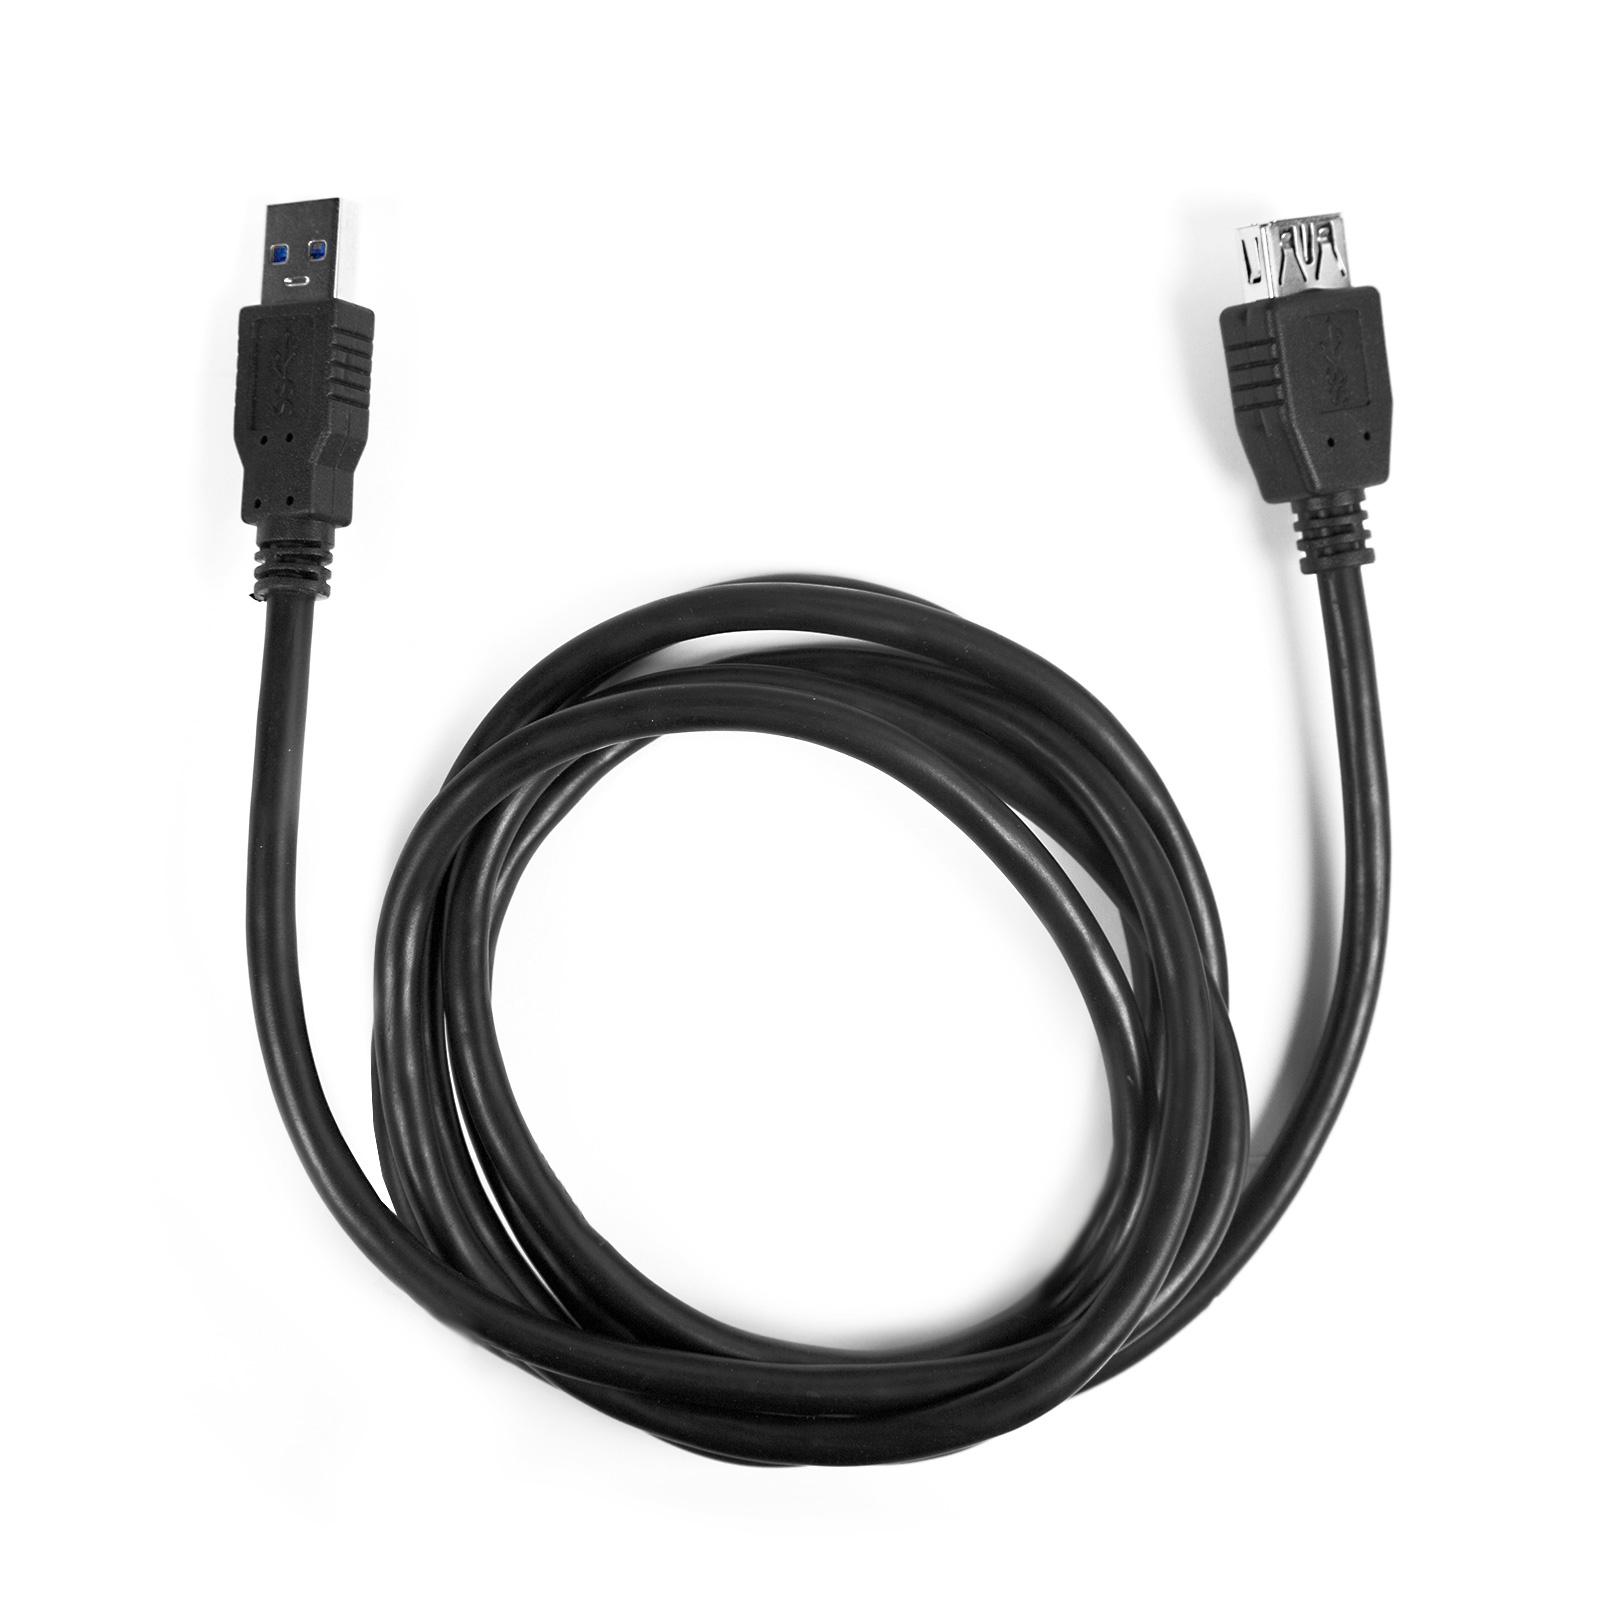 EKON USB extension cable 2.0 type A male to type A female length 3 m. nickel plated